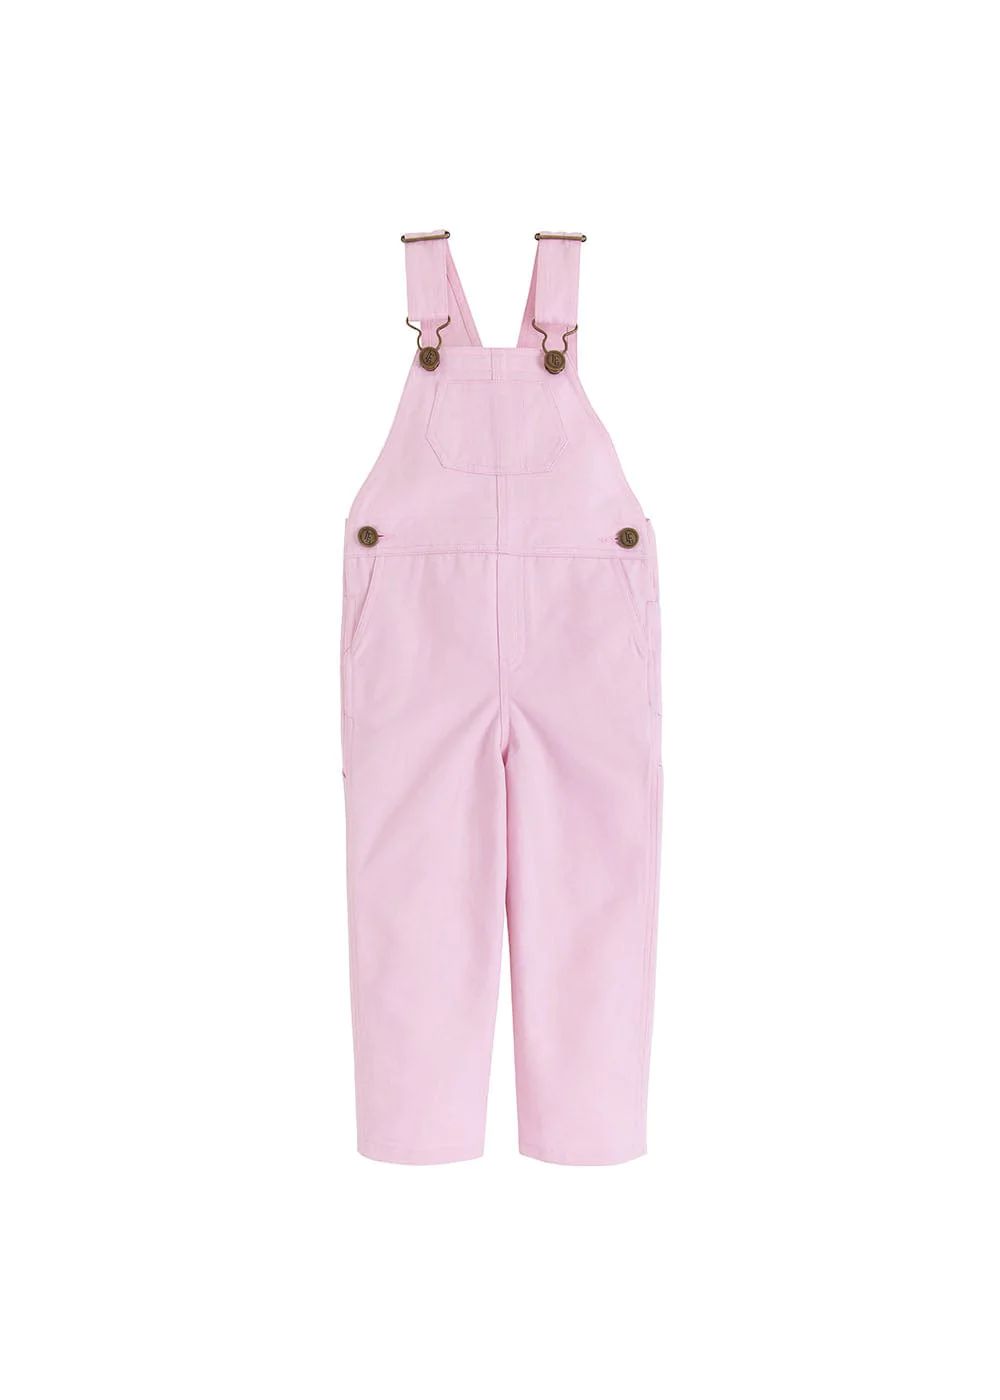 Essential Overall - Light Pink Twill | Little English